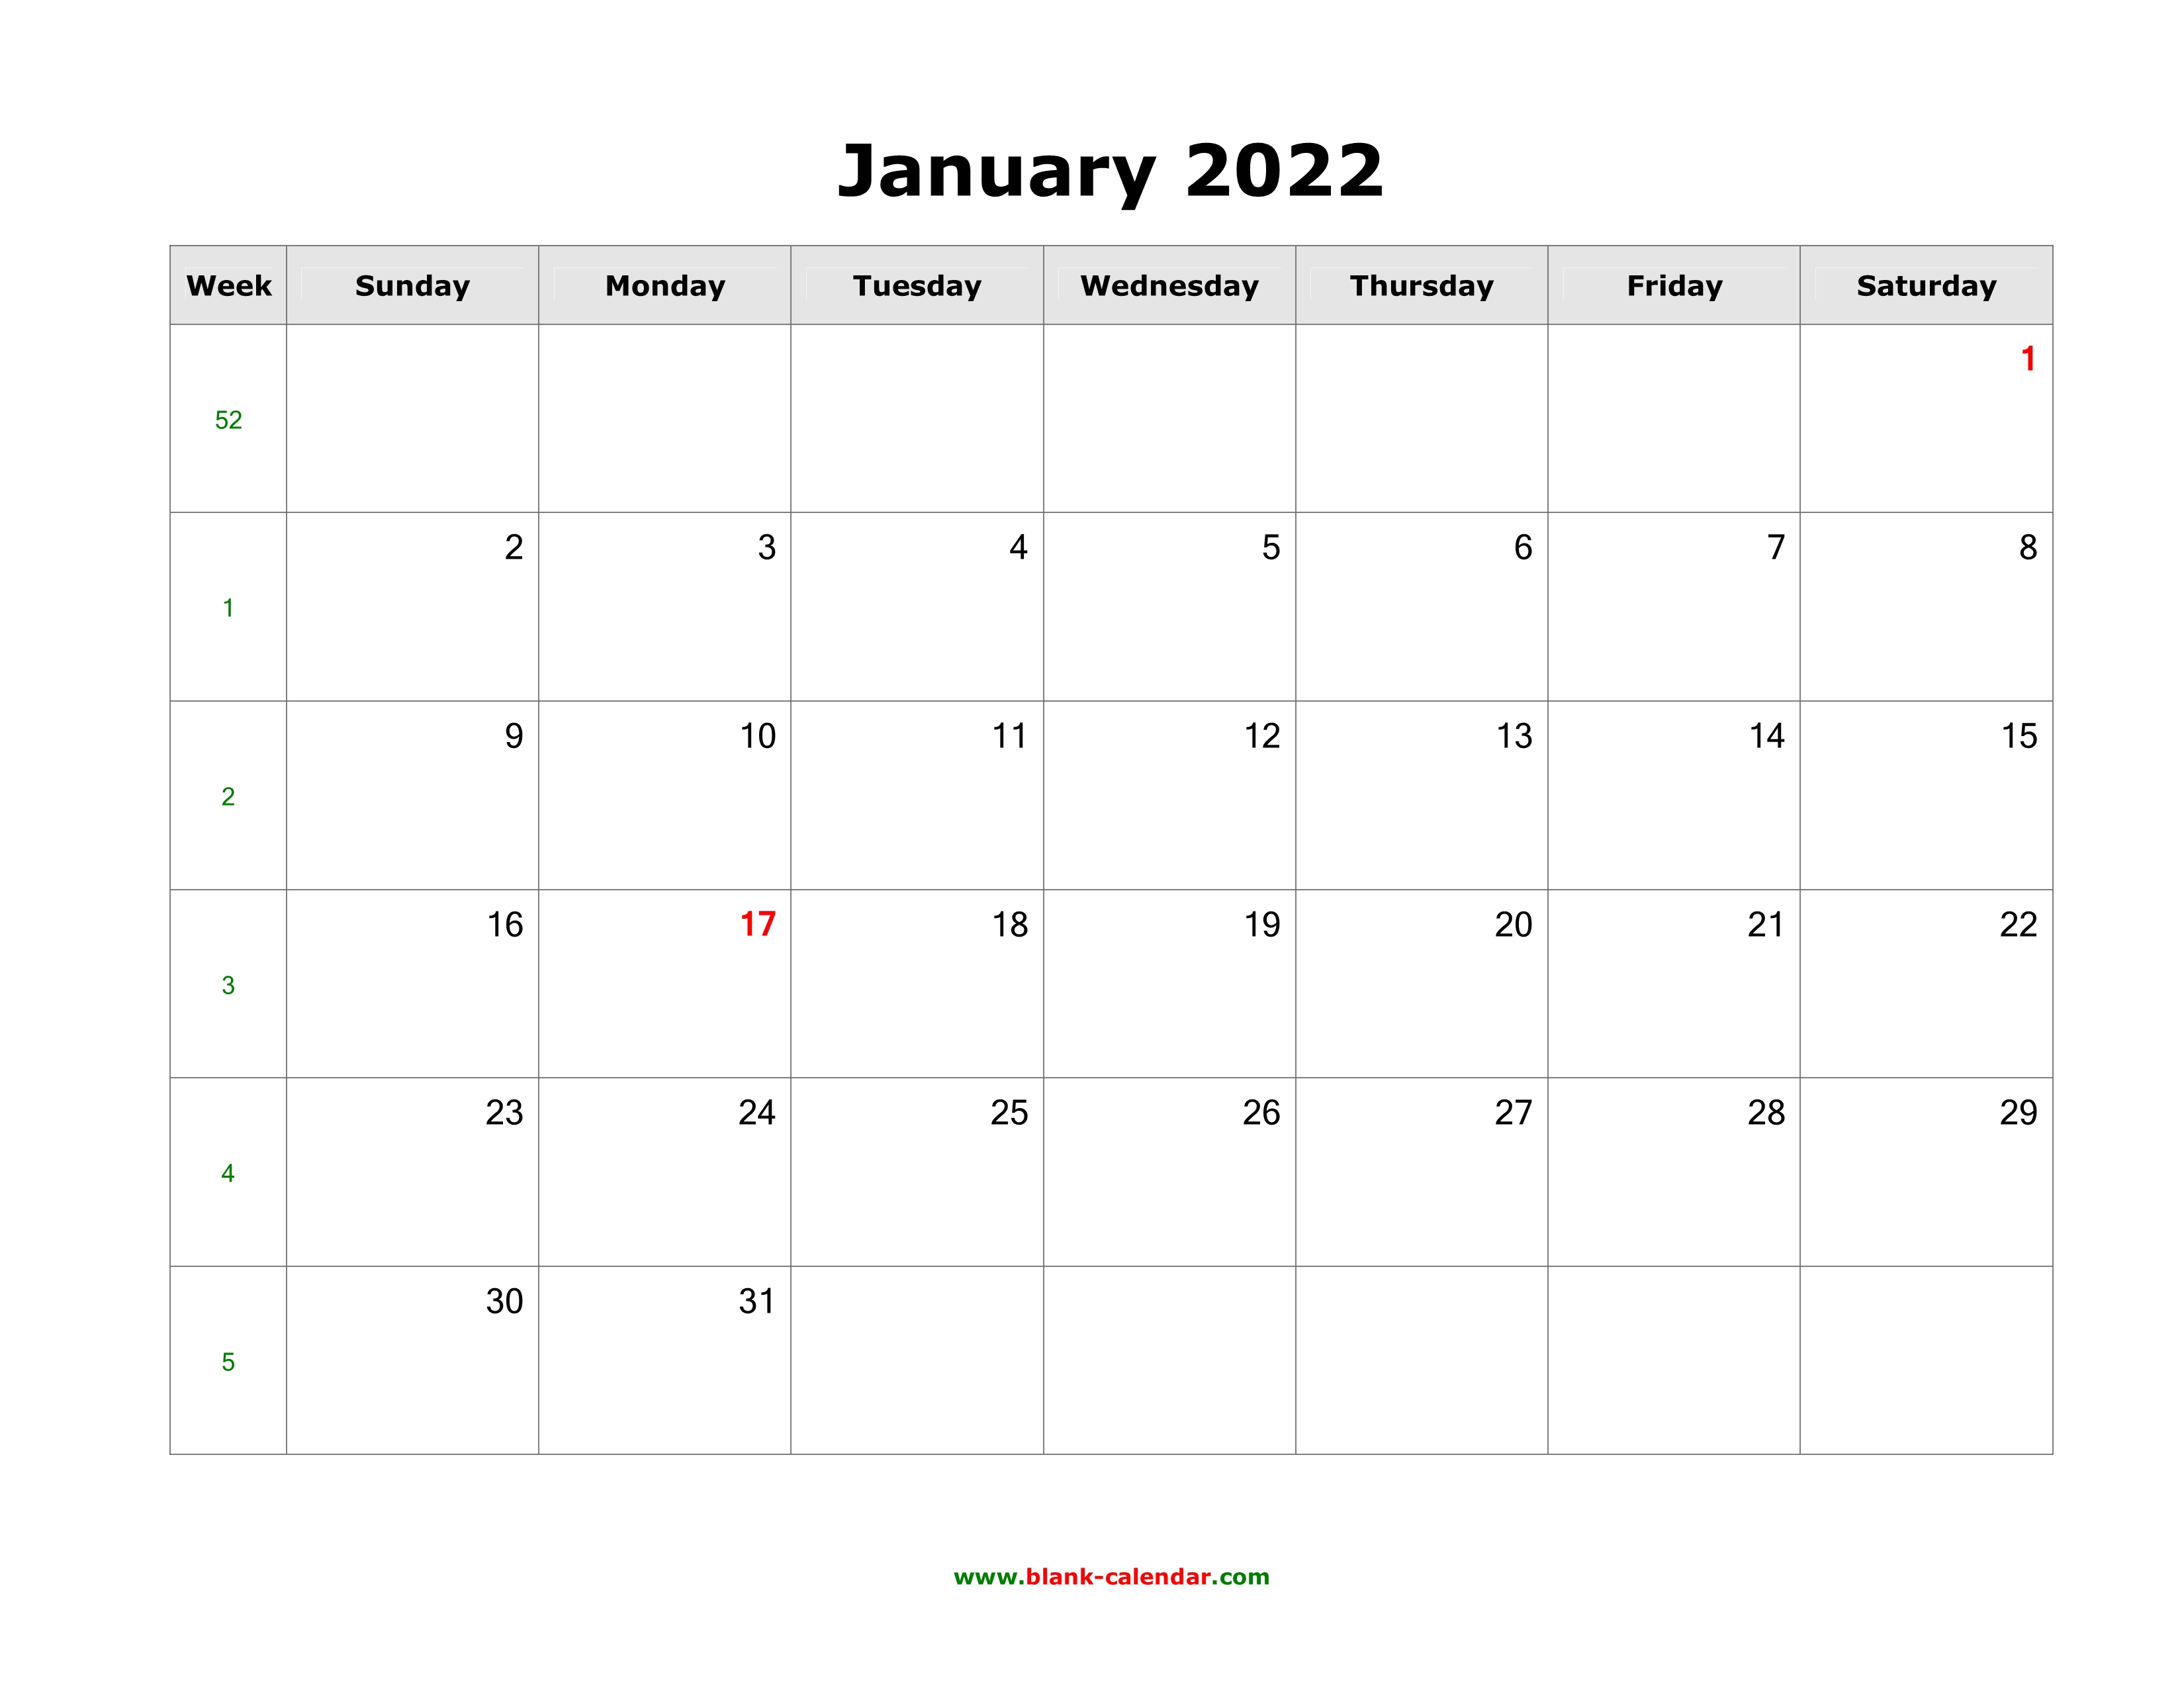 Print Blank 2022 Calendar Download Blank Calendar 2022 (12 Pages, One Month Per Page, Horizontal)